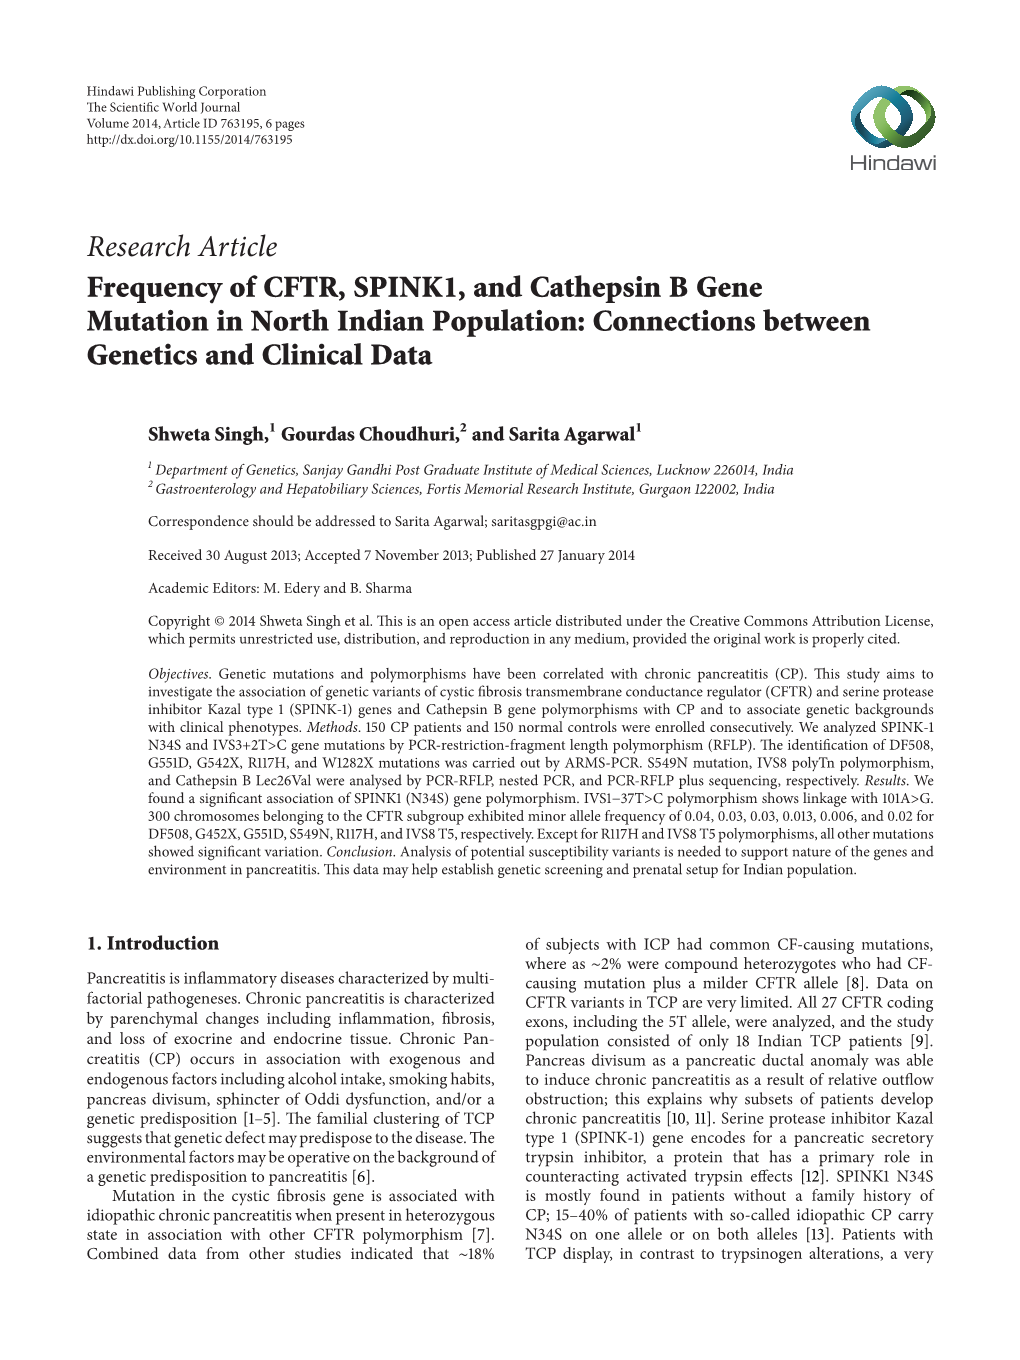 Frequency of CFTR, SPINK1, and Cathepsin B Gene Mutation in North Indian Population: Connections Between Genetics and Clinical Data